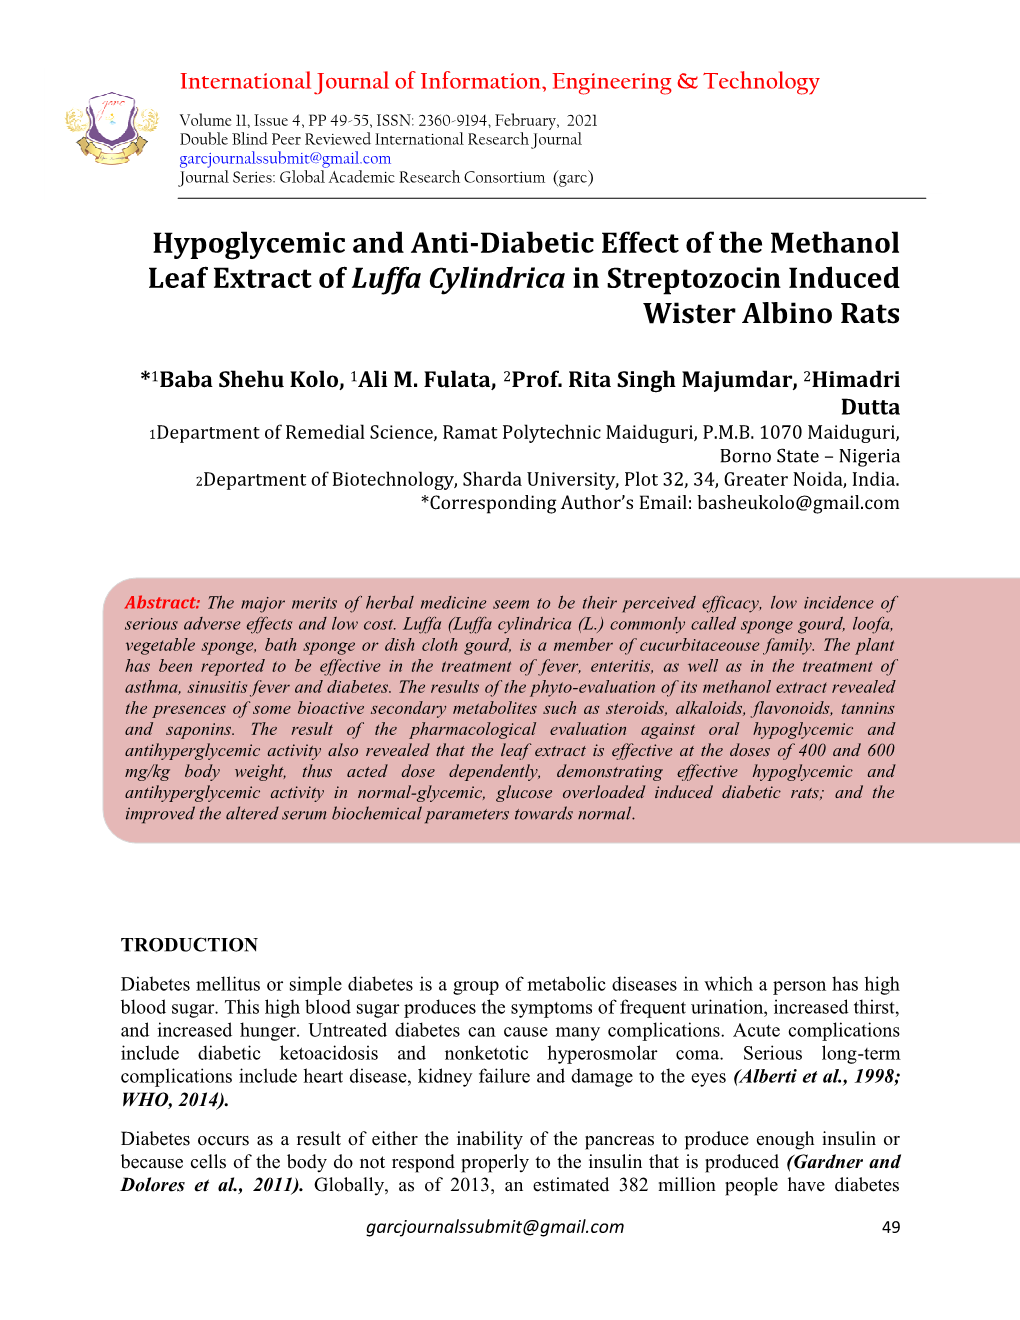 Hypoglycemic and Anti-Diabetic Effect of the Methanol Leaf Extract of Luffa Cylindrica in Streptozocin Induced Wister Albino Rats